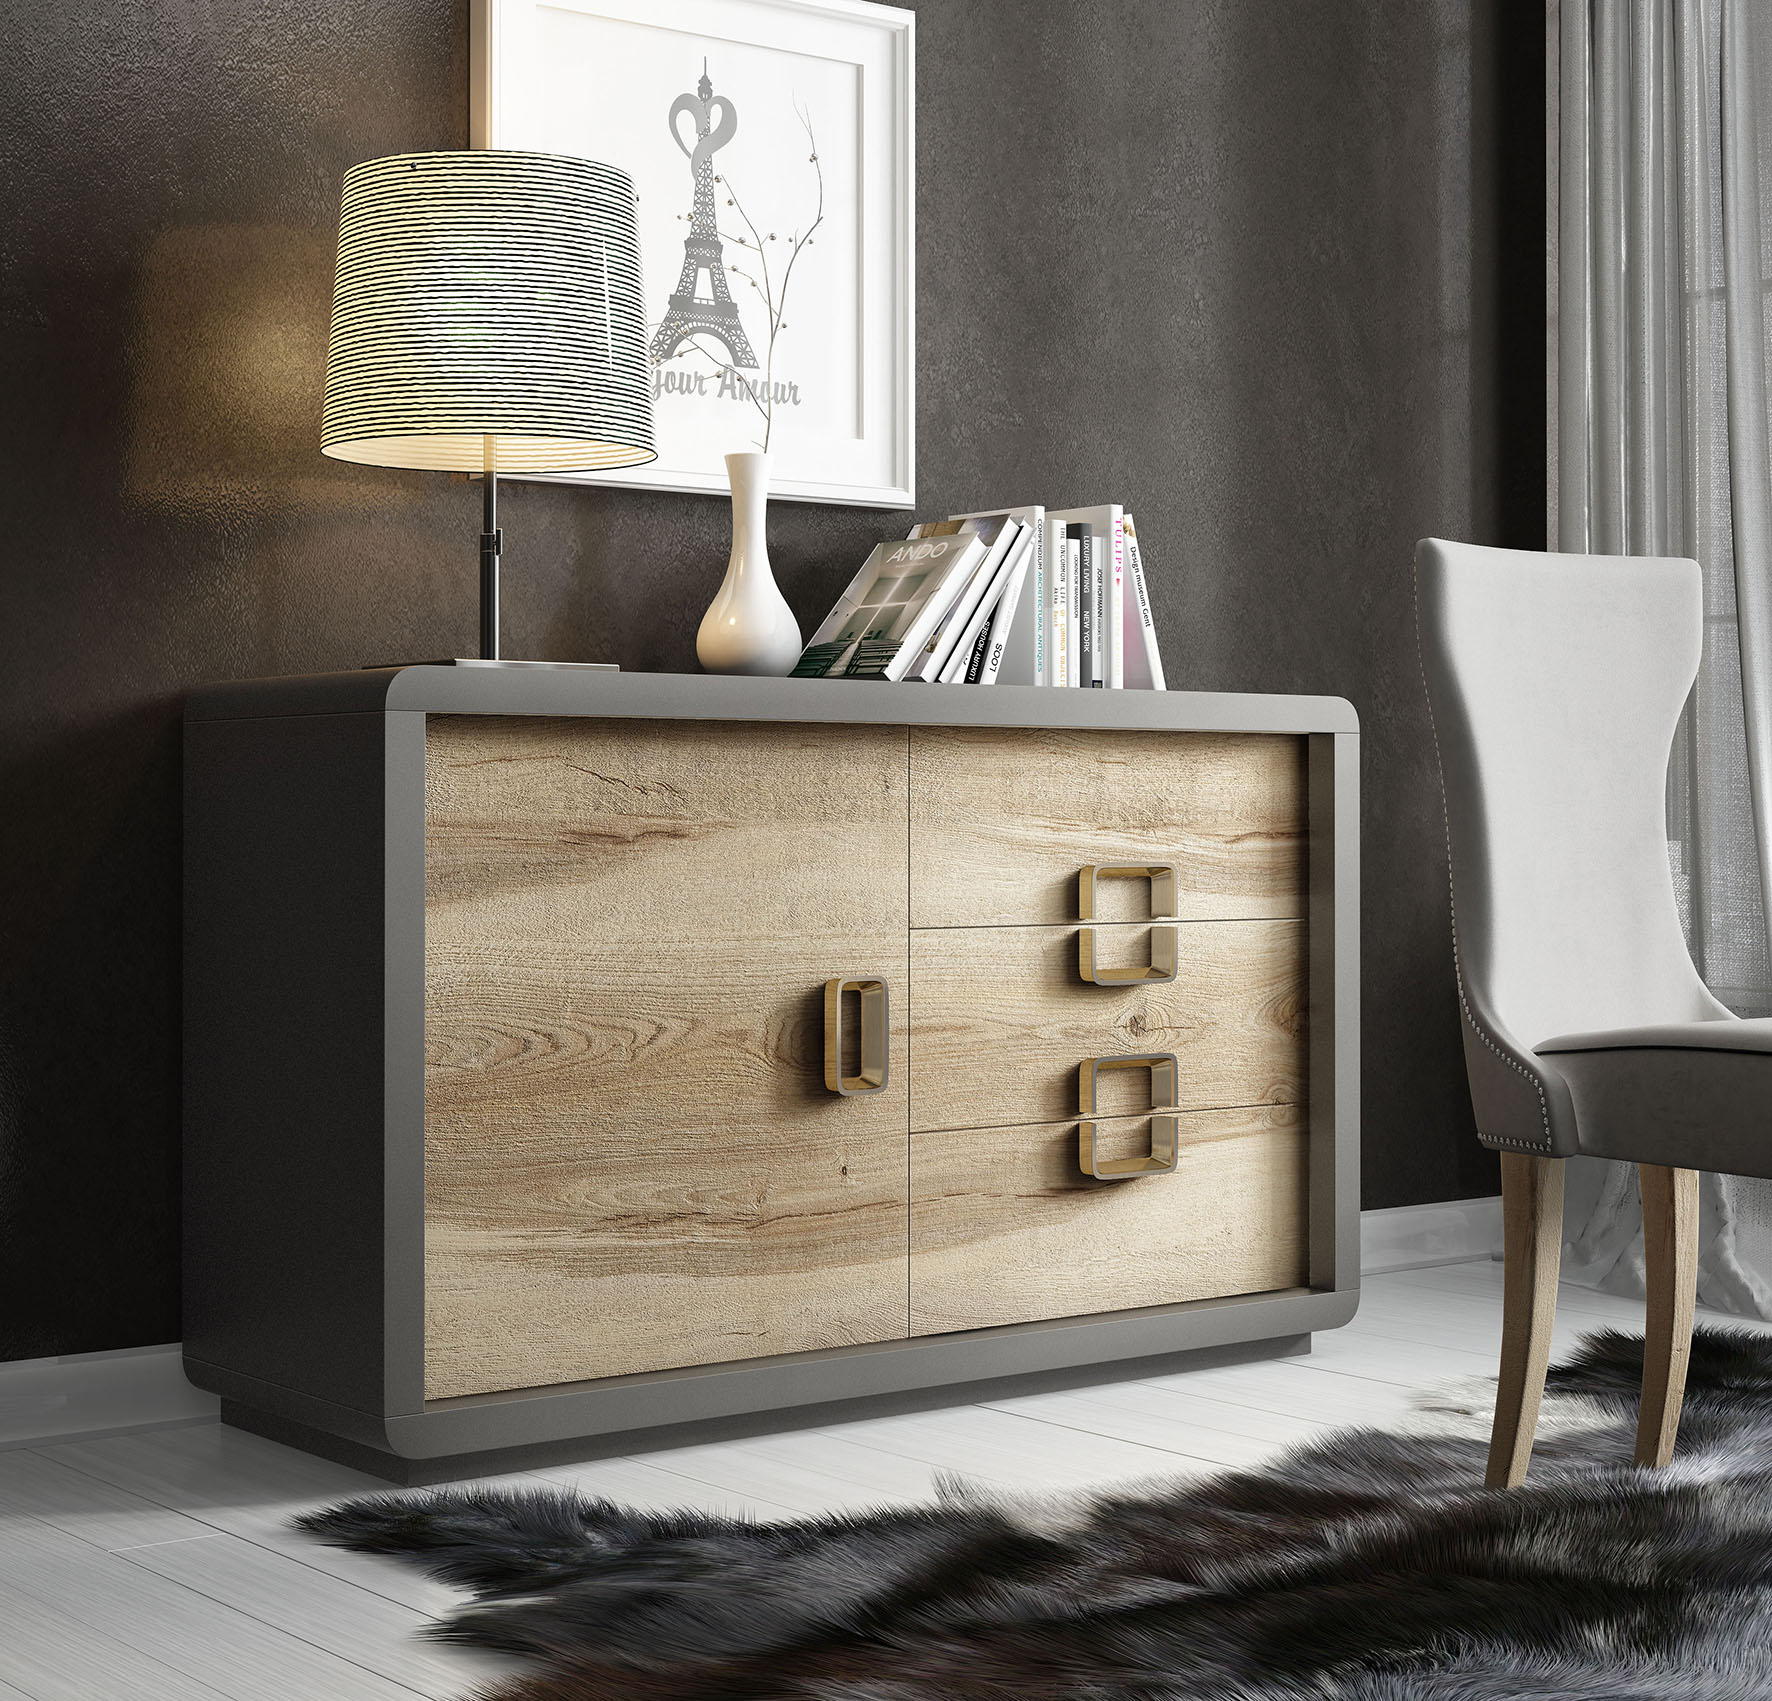 Brands Franco ENZO Dining and Wall Units, Spain AII.27 Sideboard